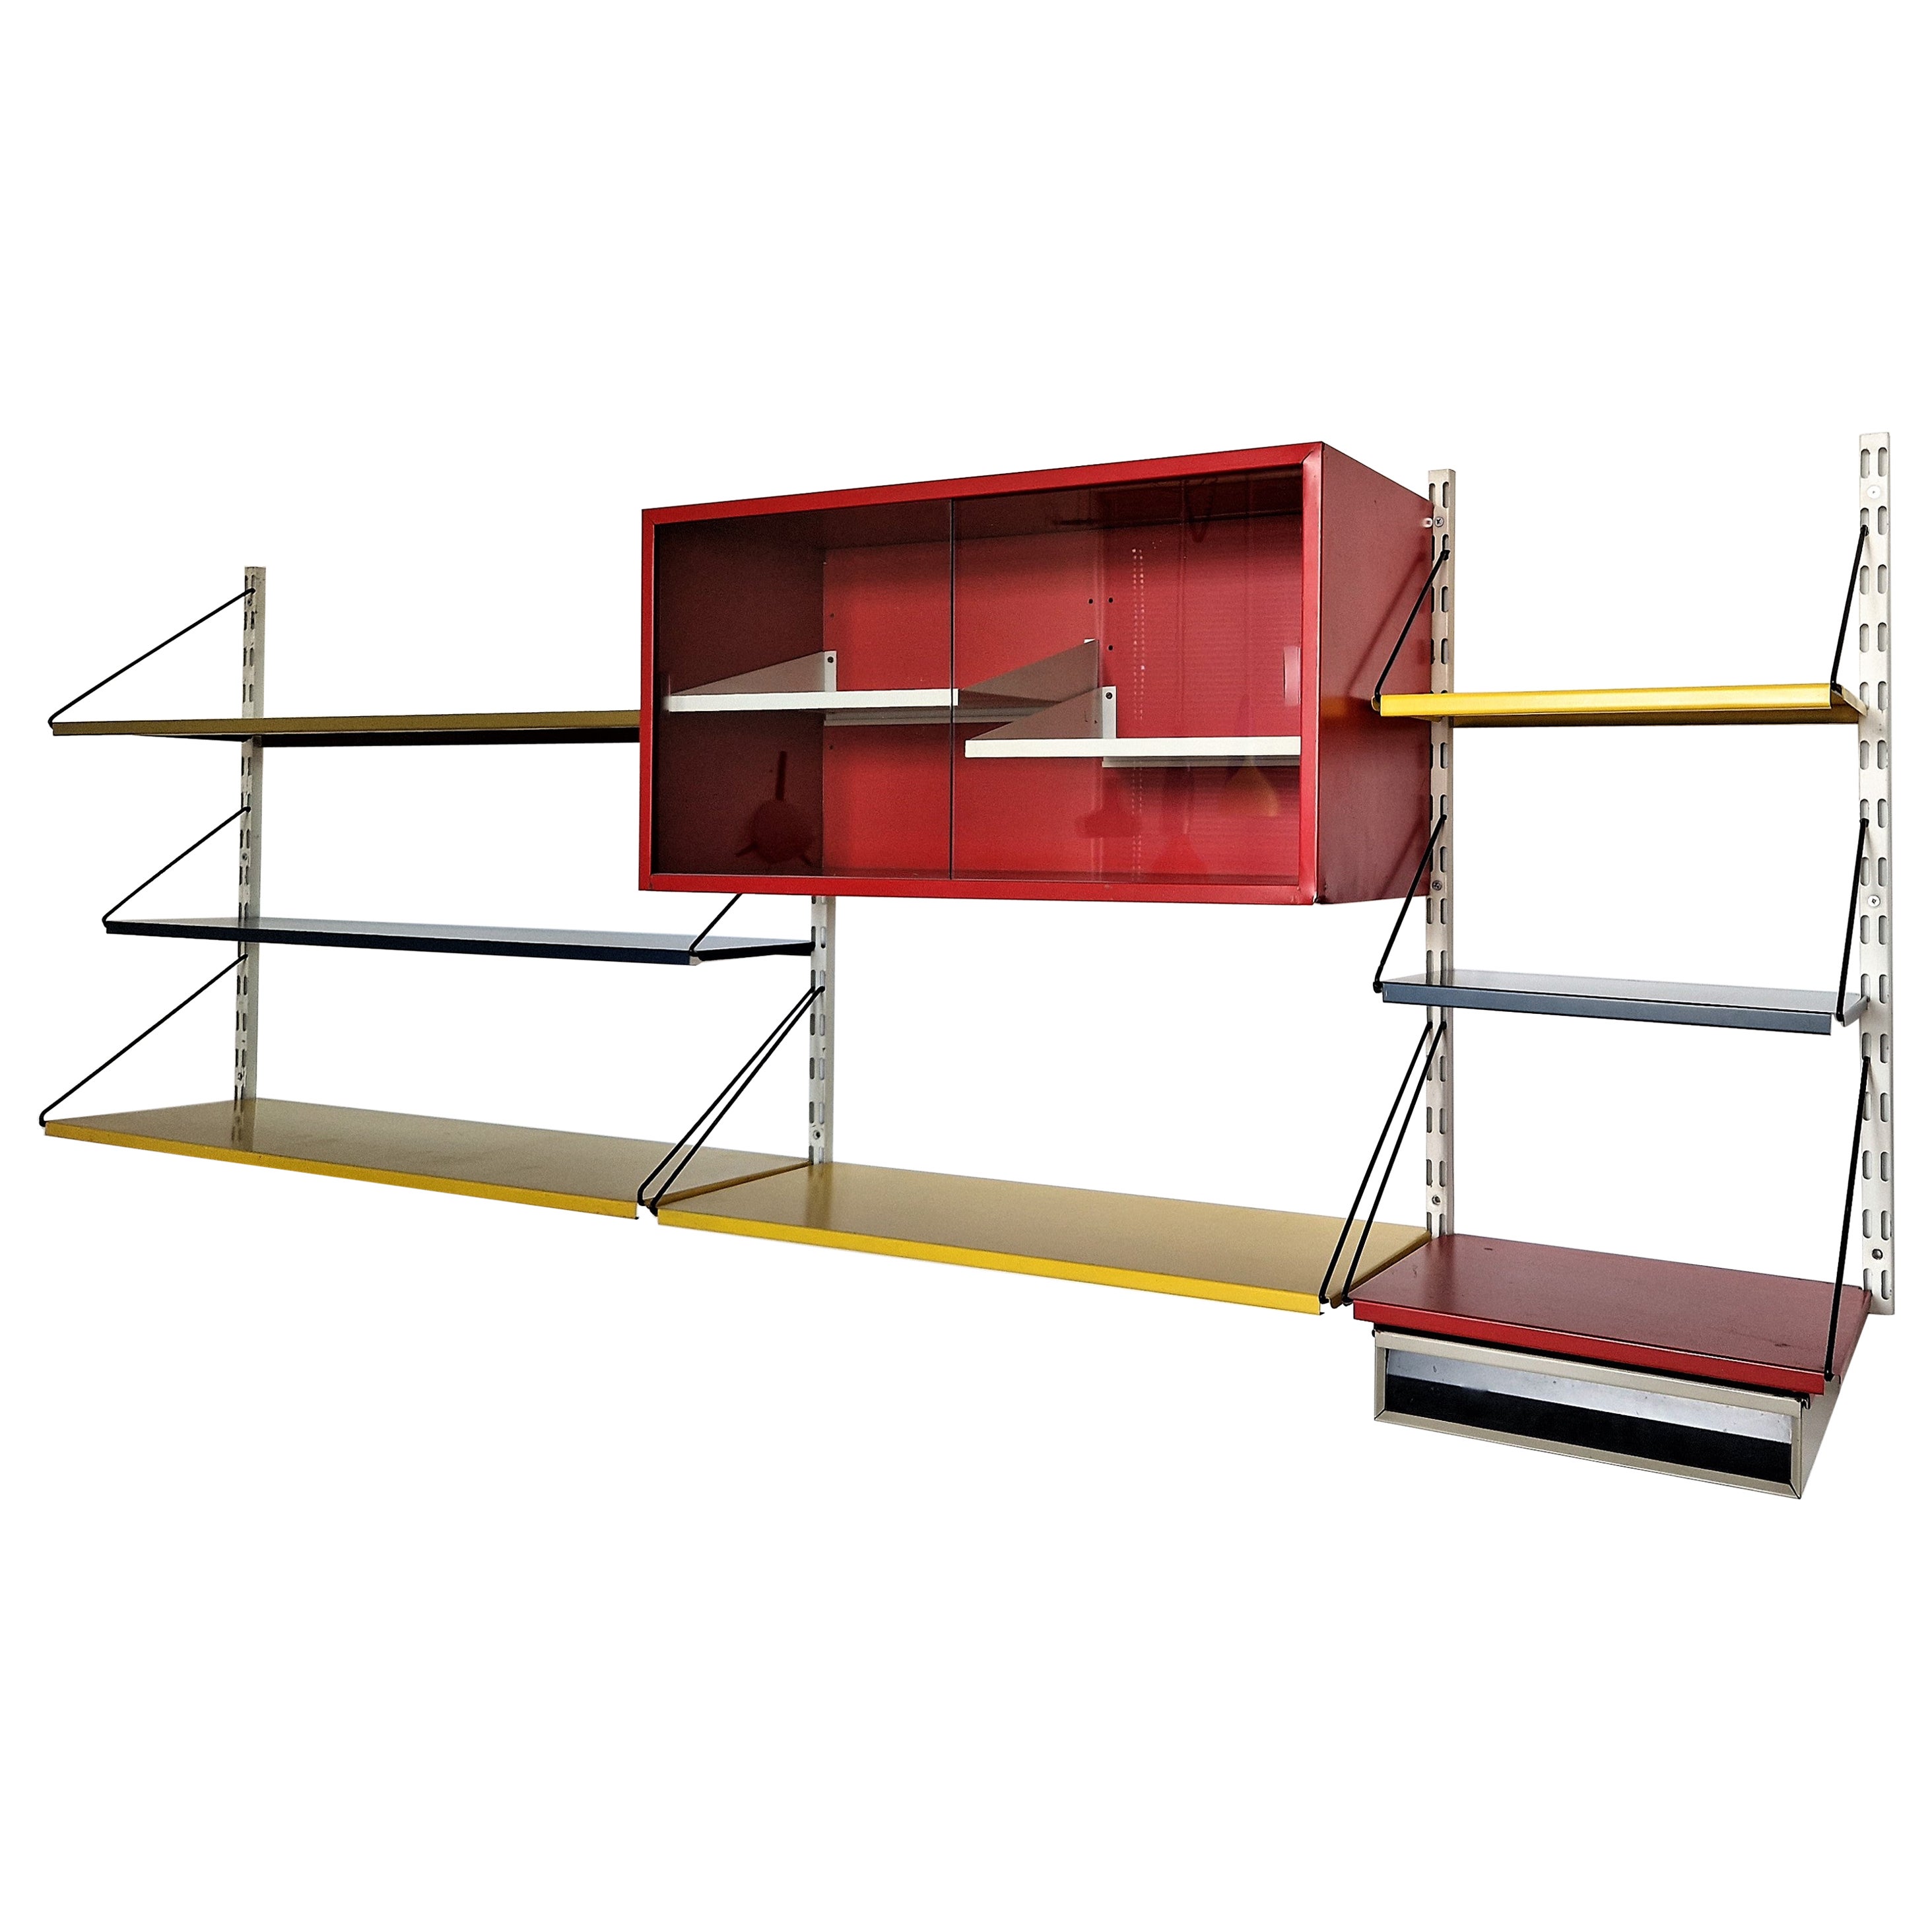 Metal Wall Unit in Red, Yellow and Blue by Tjerk Rijenga for Pilastro, 1950's For Sale